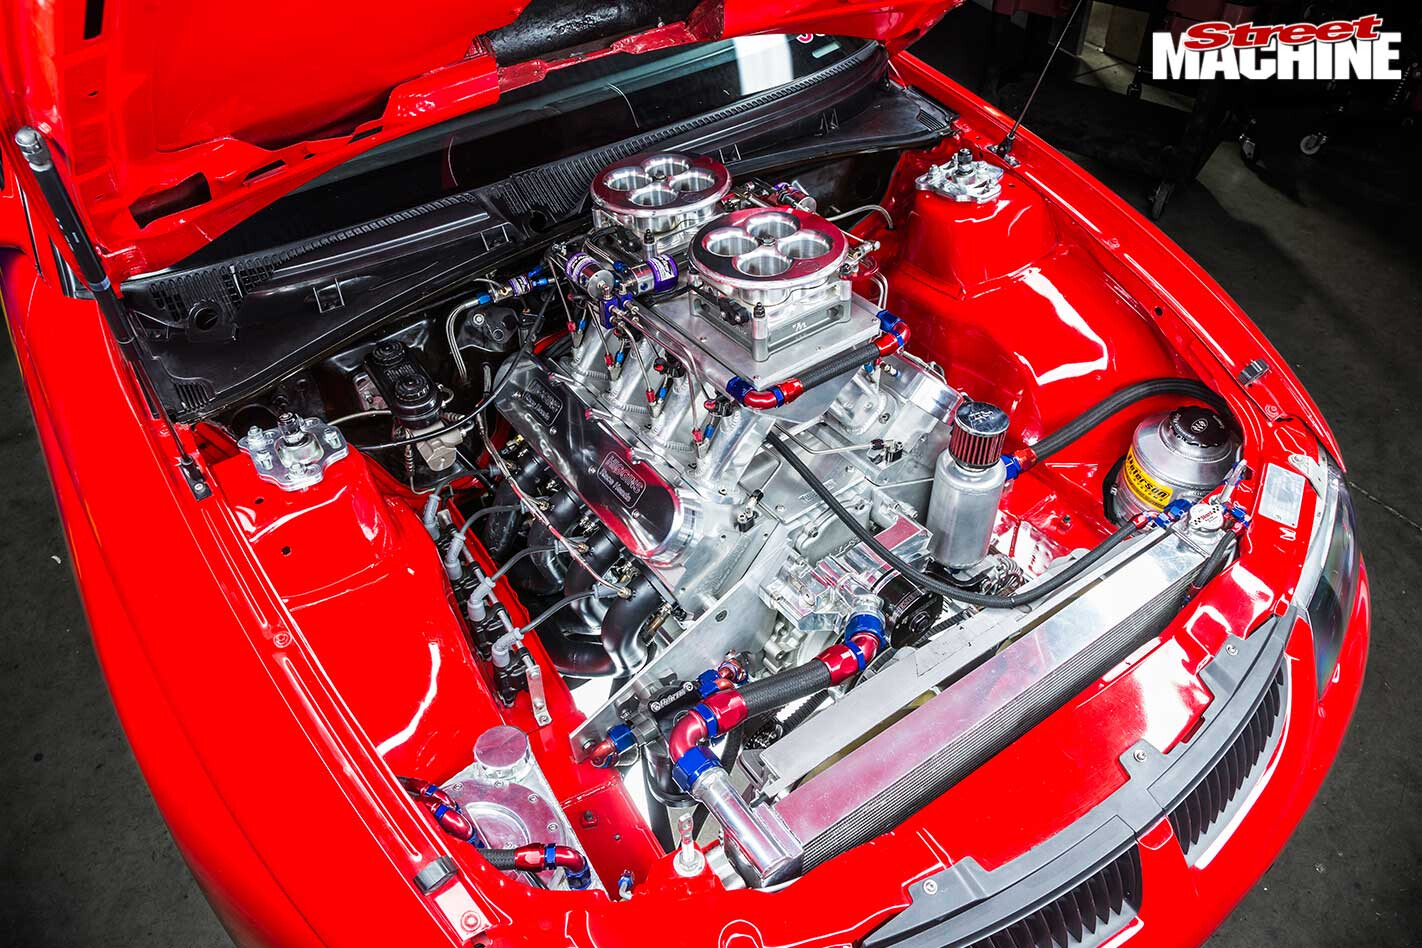 Holden VX SS Commodore engine bay